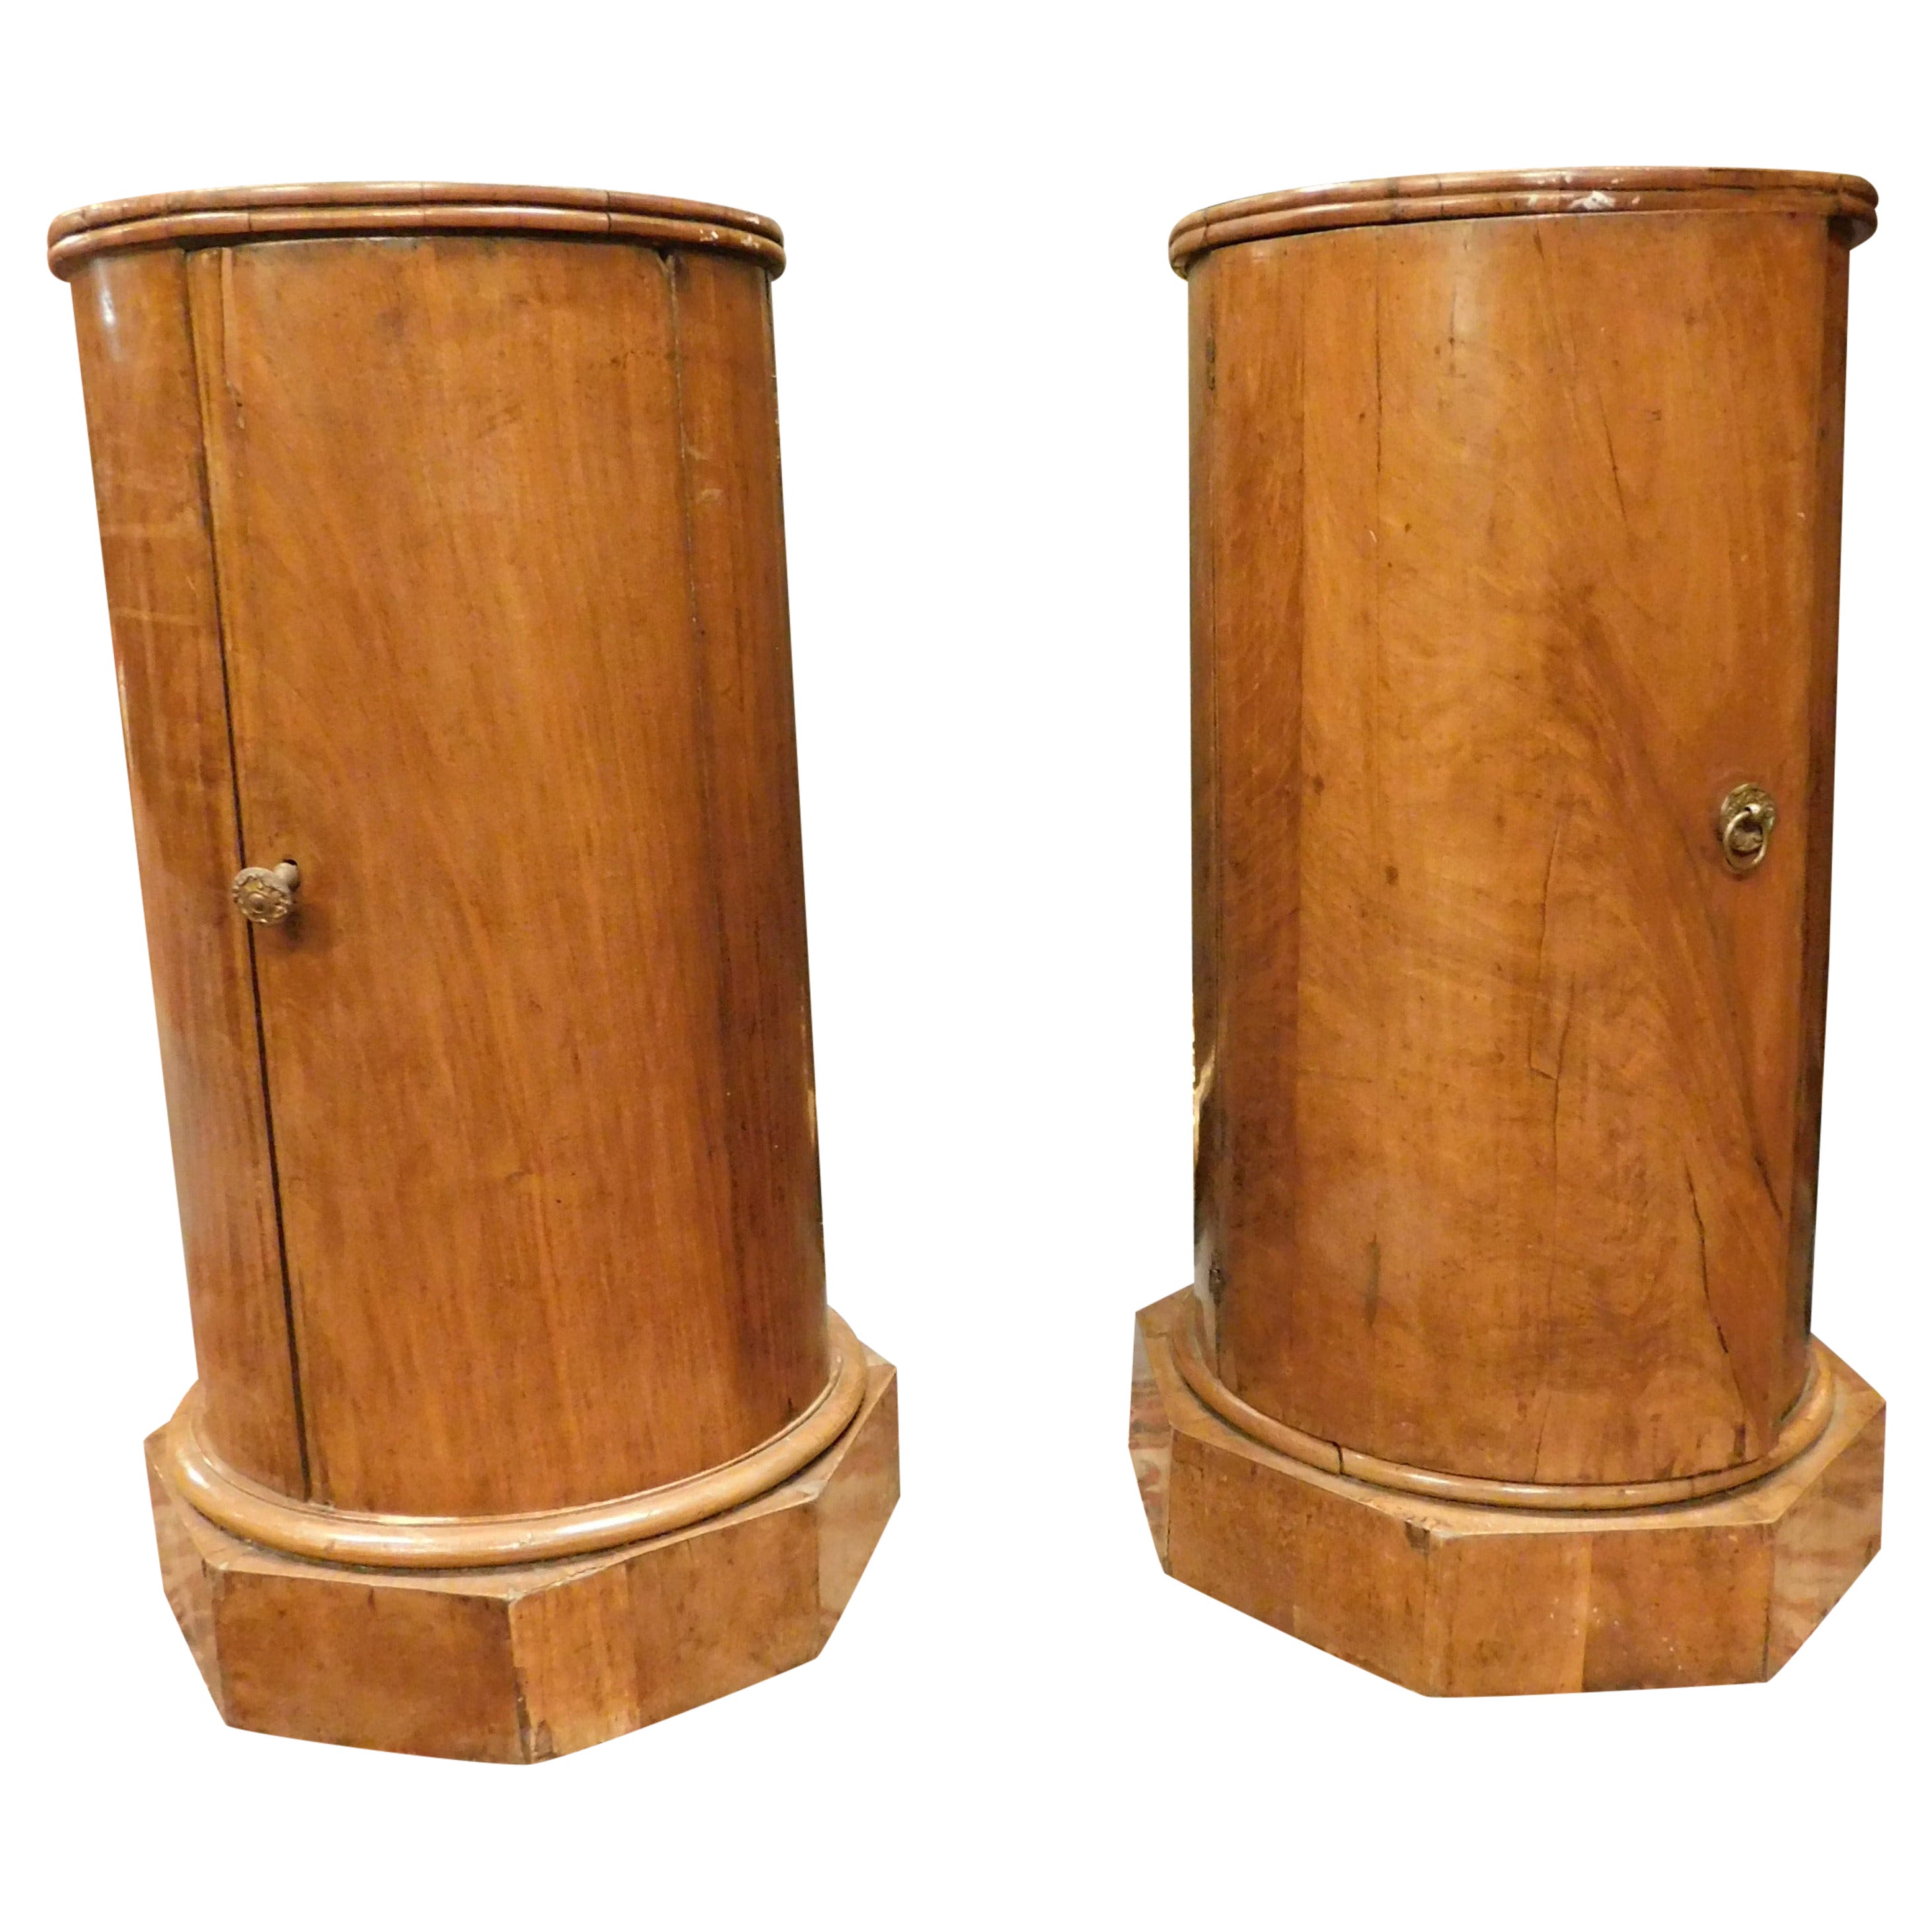 Antique Pair of Walnut Cylinder Tables, Night Tables, Early 19th Century, Italy